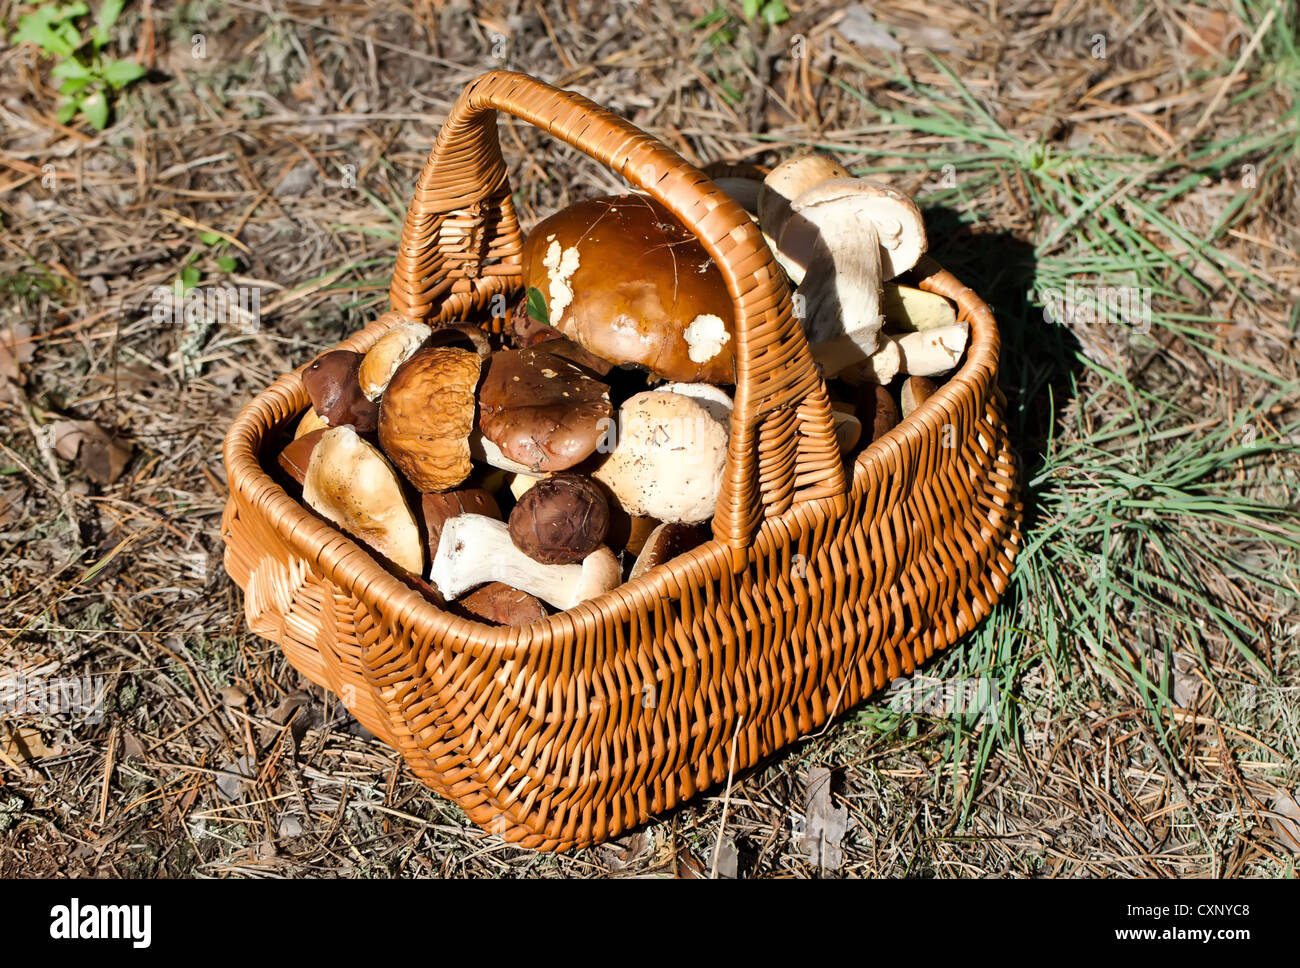 Basket with different autumn mushrooms in forest Stock Photo